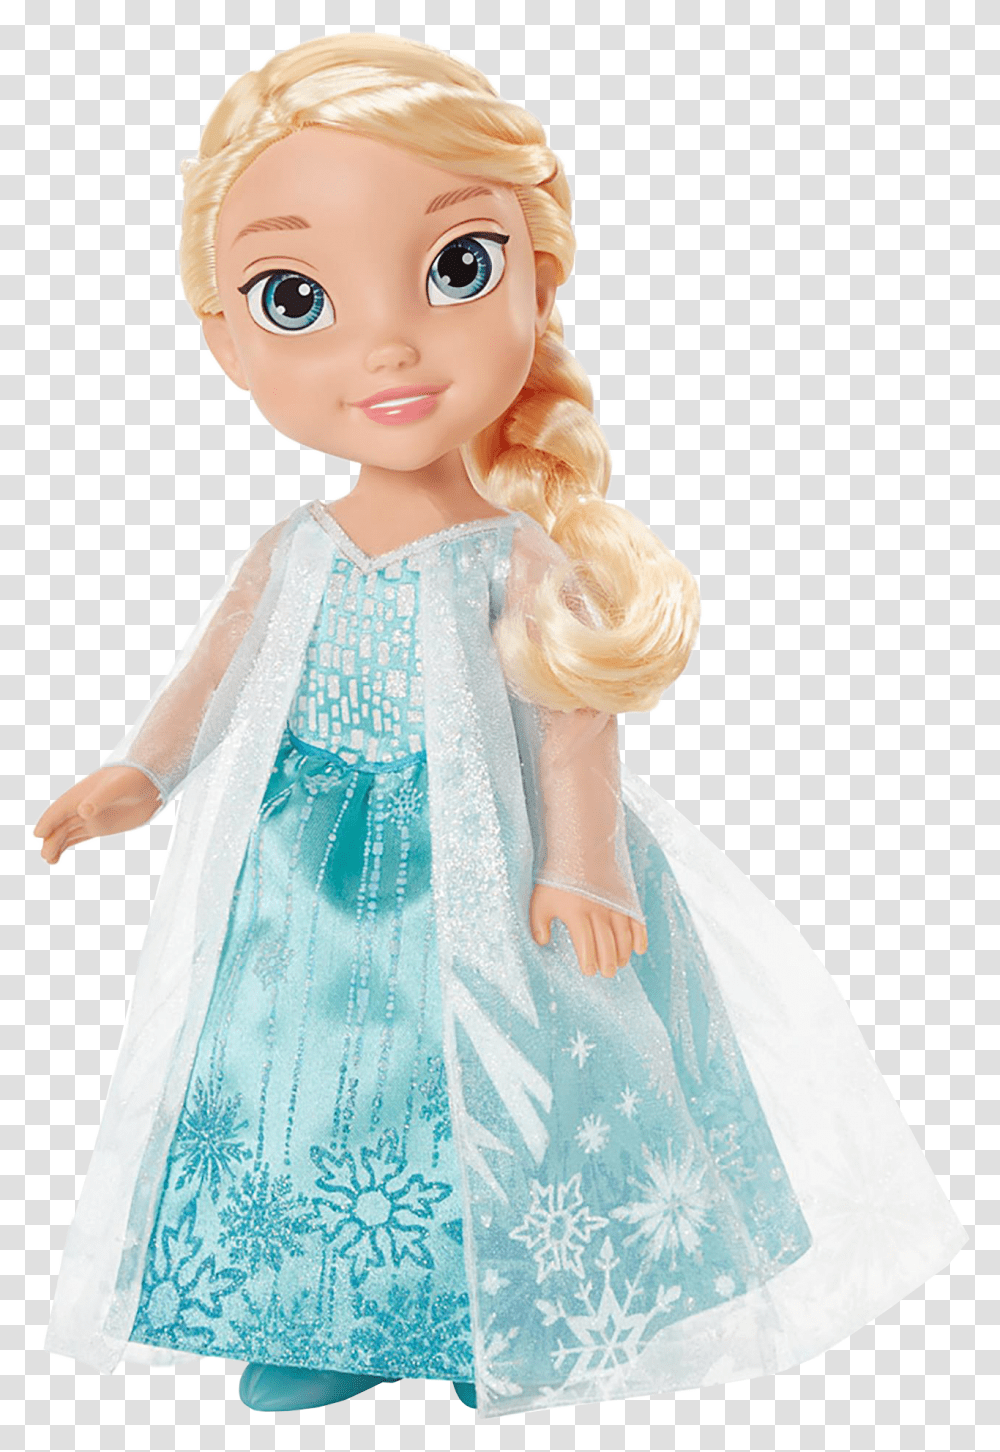 Elsa Toddler Download Frozen Elsa Doll India, Toy, Person, Human, Wedding Gown Transparent Png